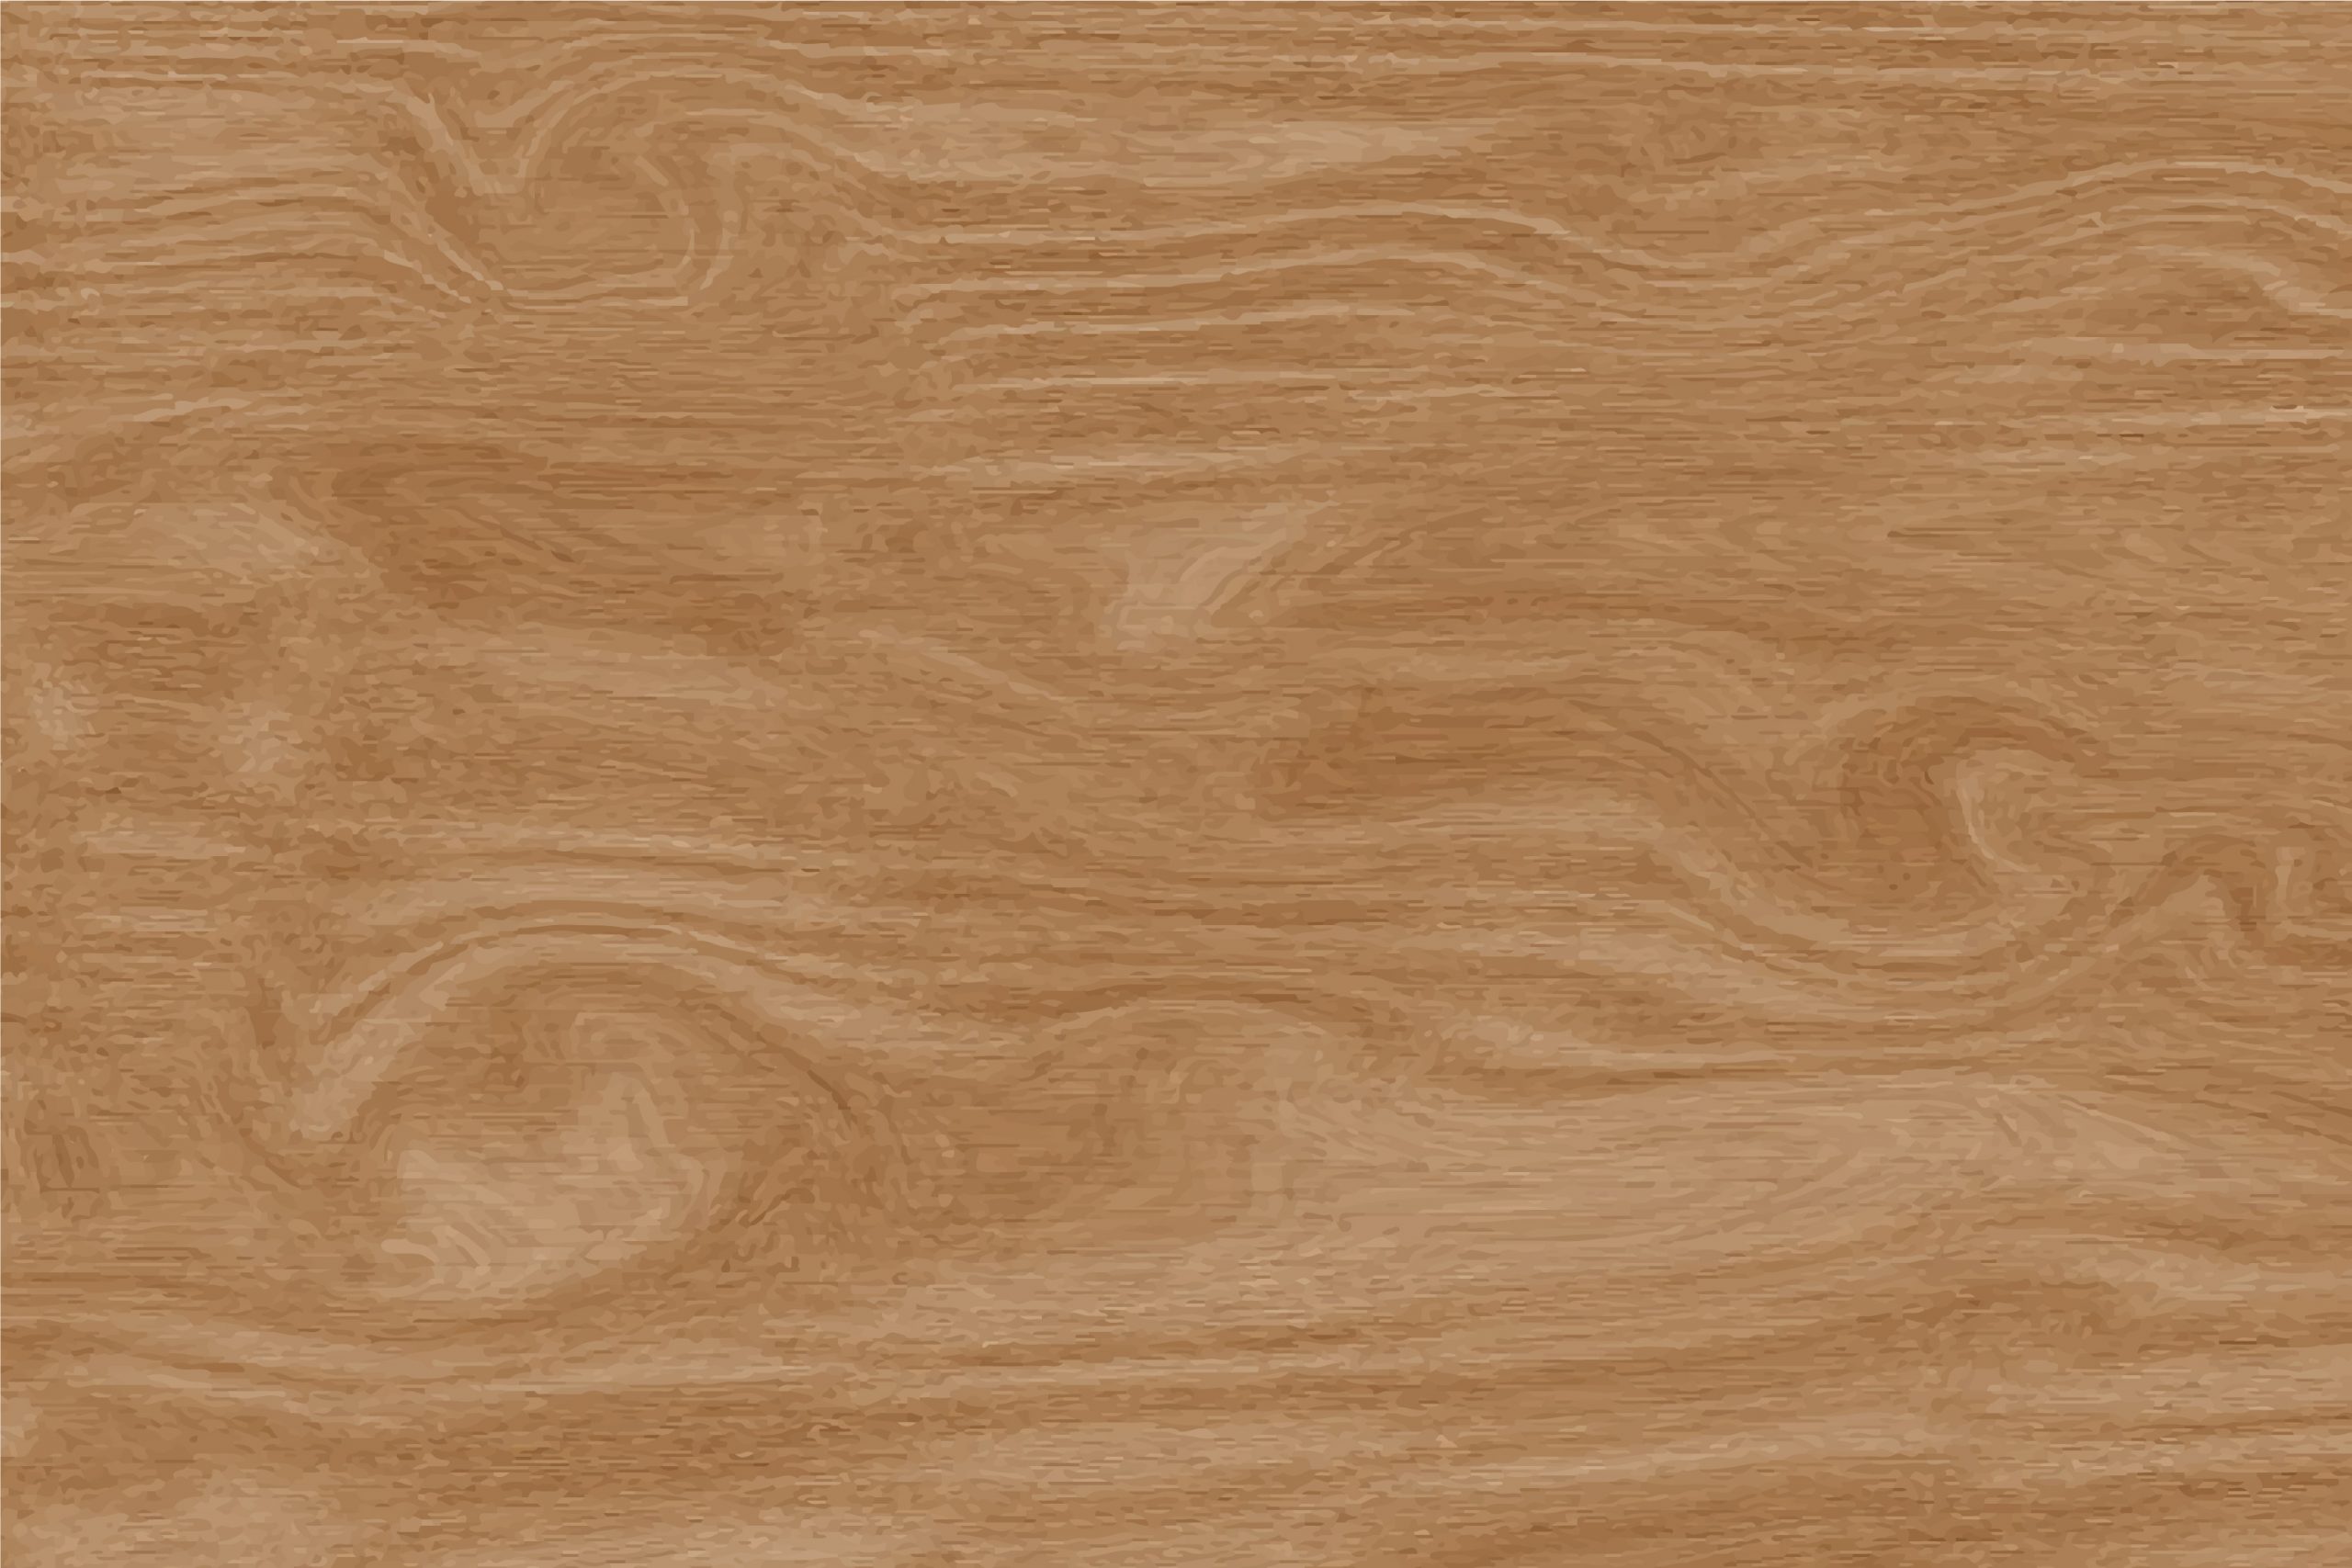 A pine wood board seen from the grain